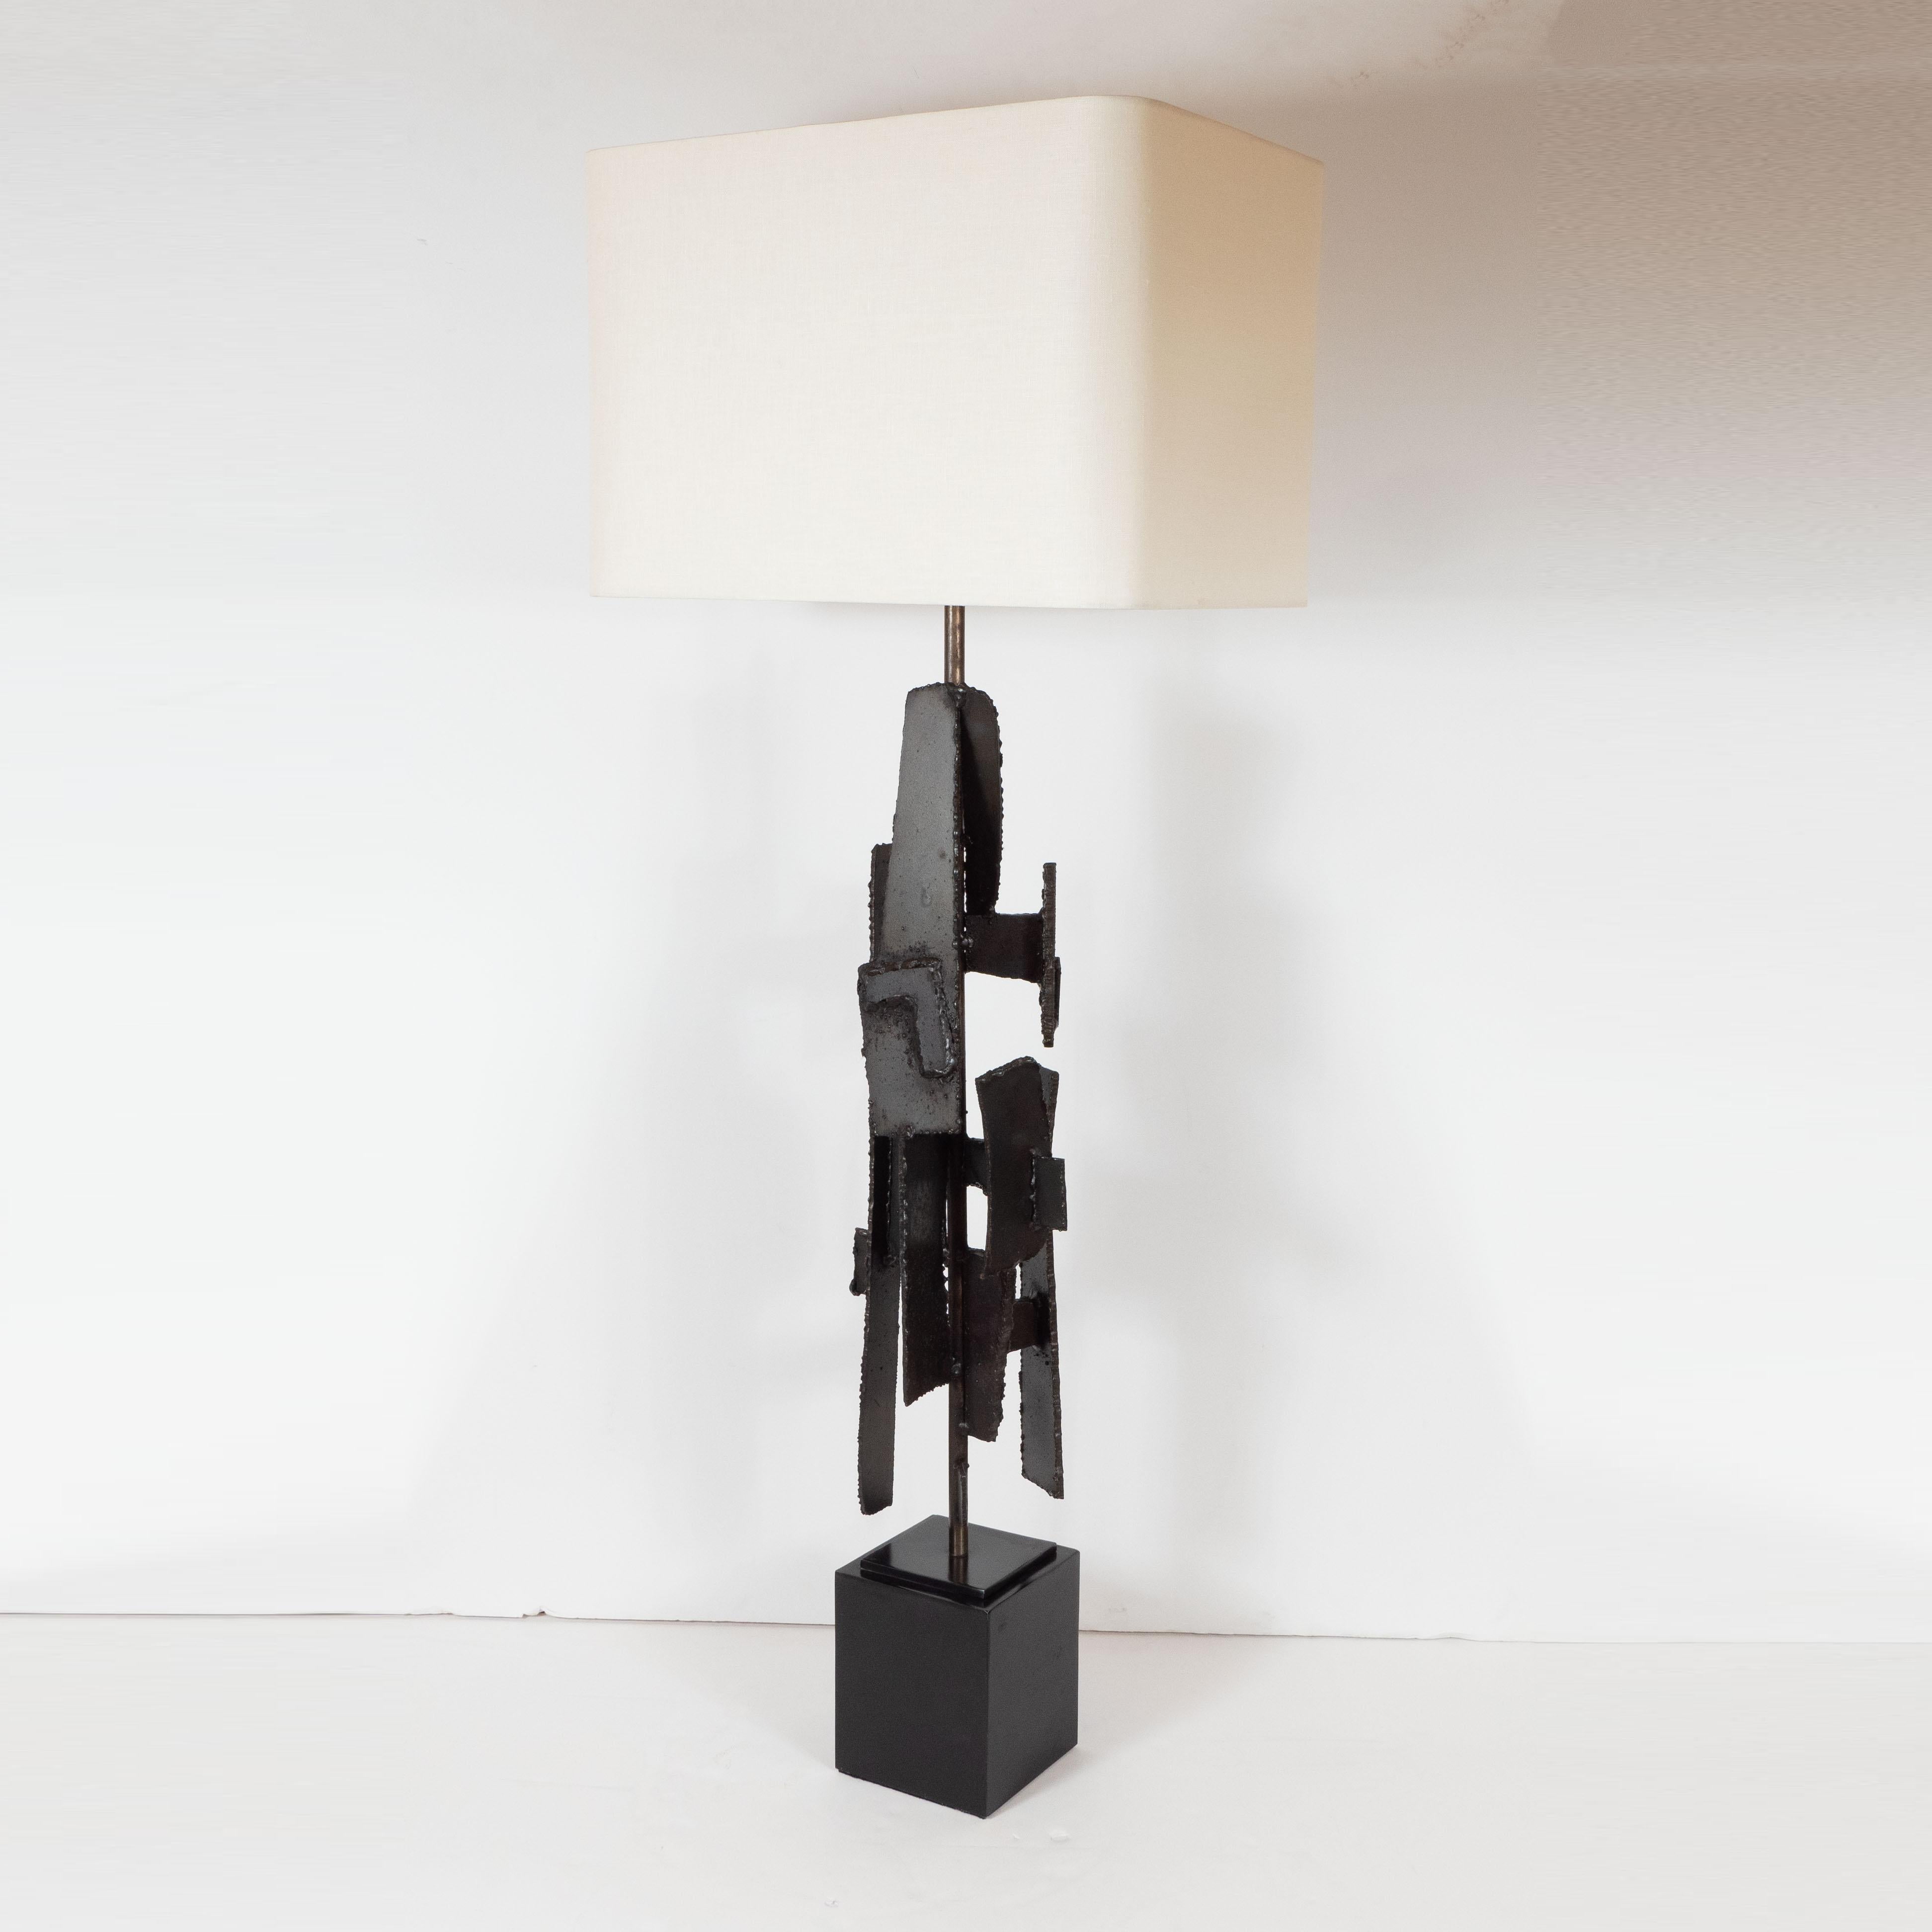 American Midcentury Brutalist Iron Mosaic Table Lamps by Harry Balmer for Laurel Company